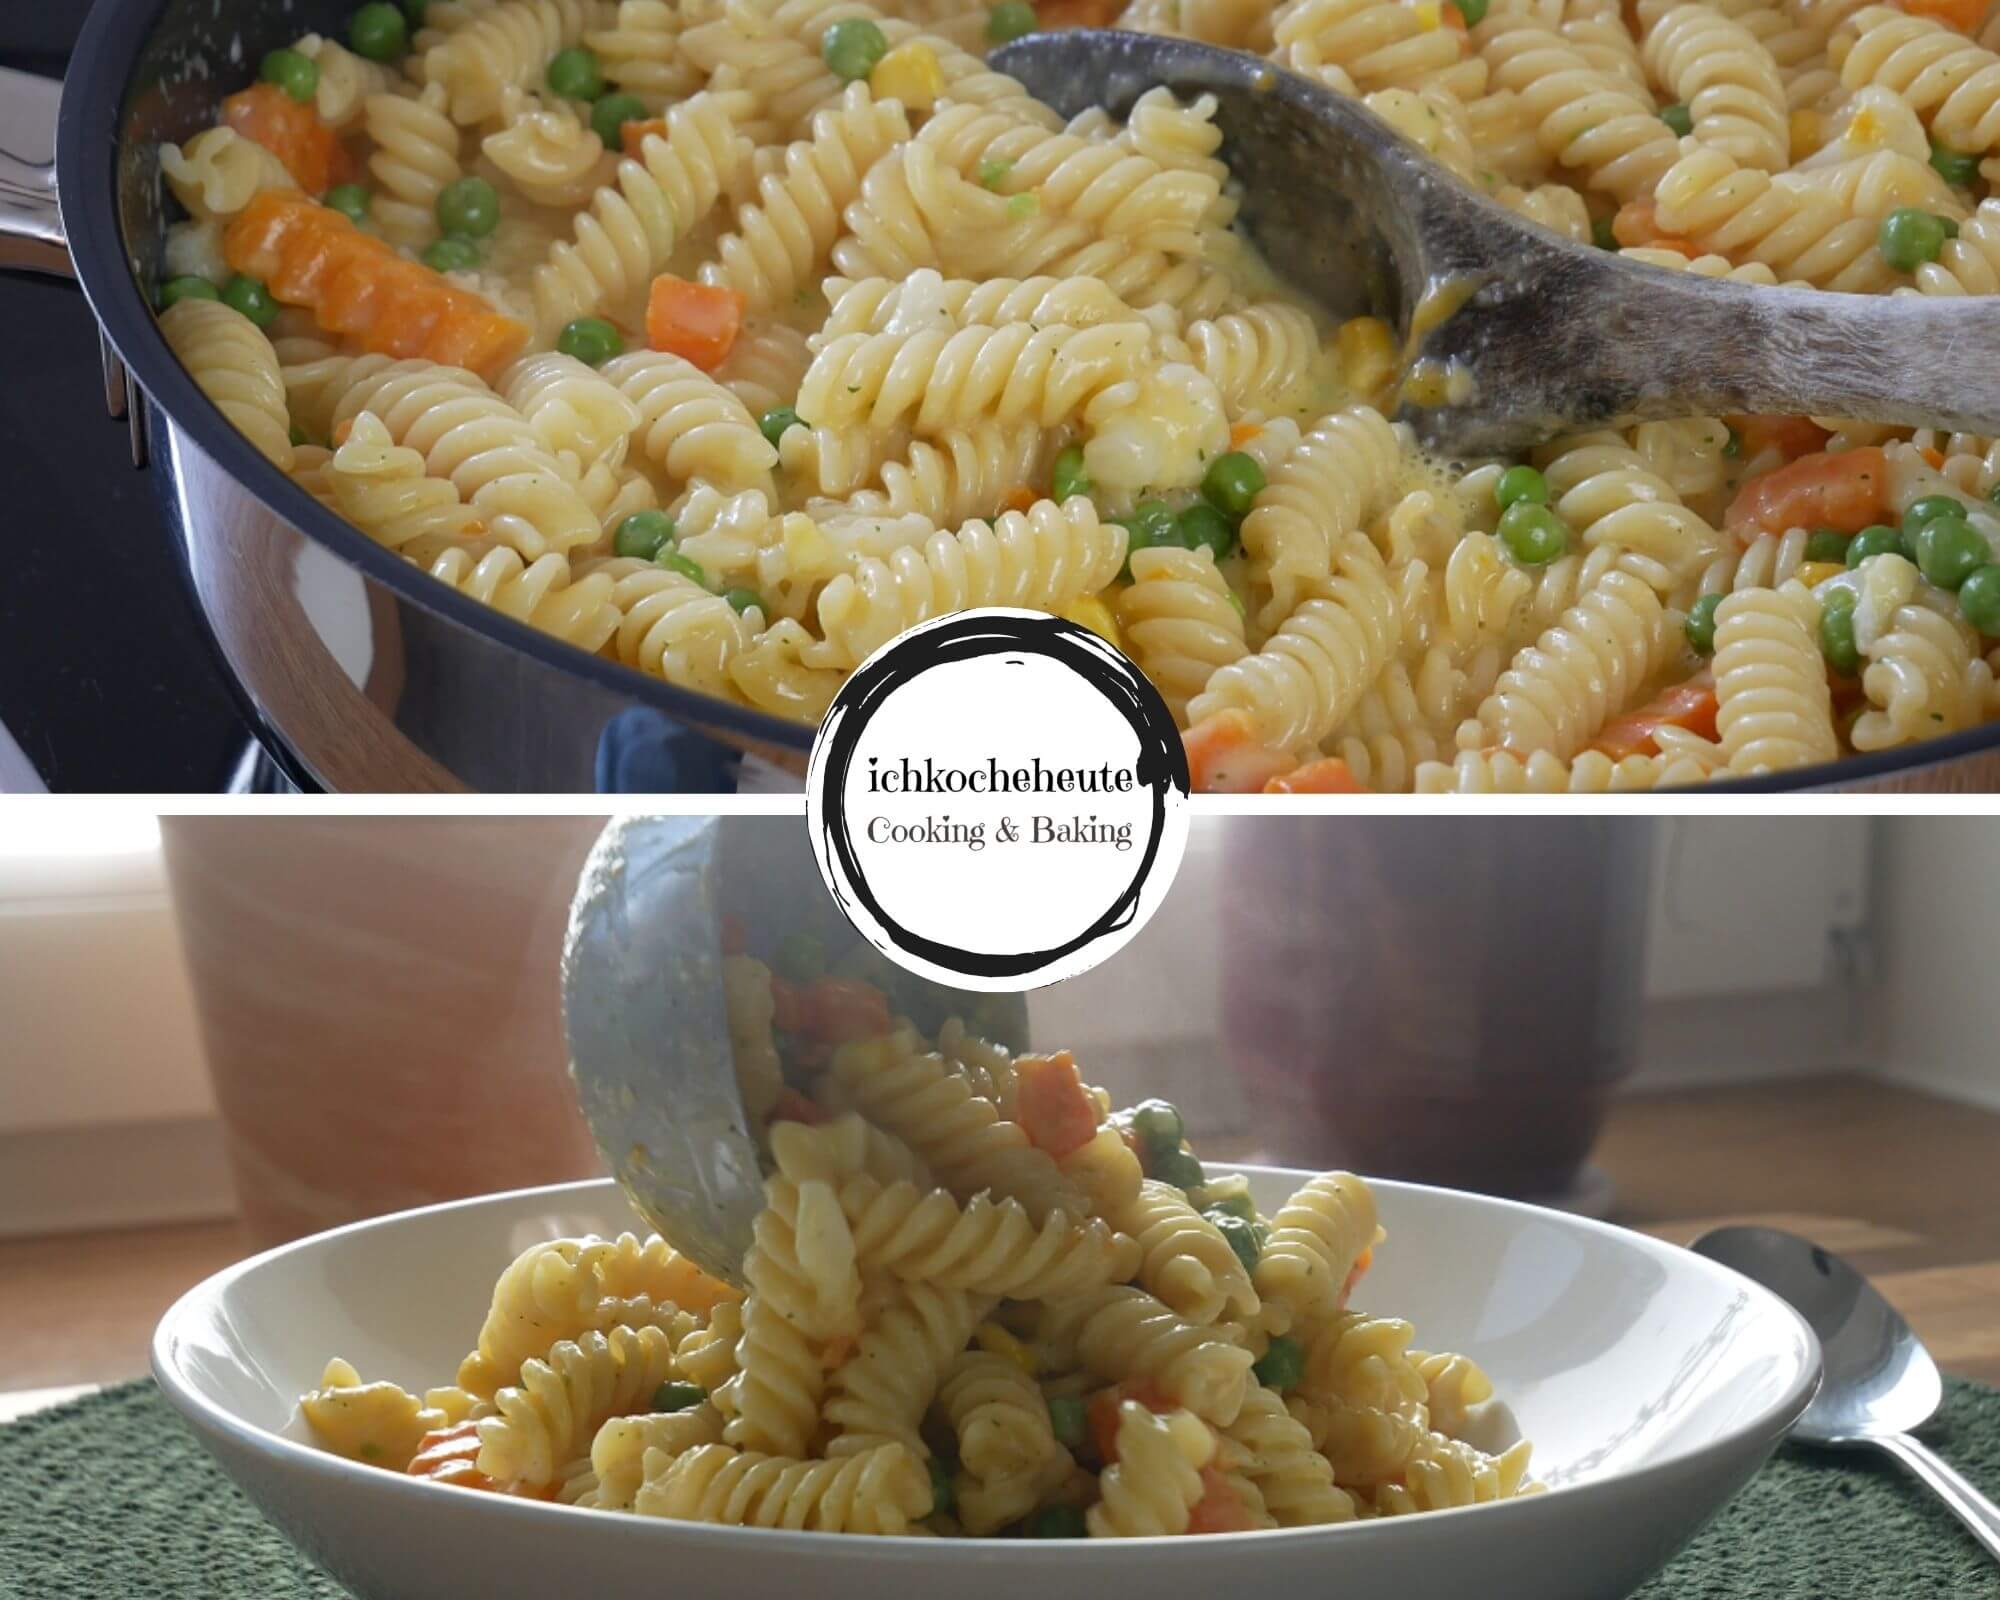 Serving One Pot Pasta with Buttered Veggies & Cheese Sauce